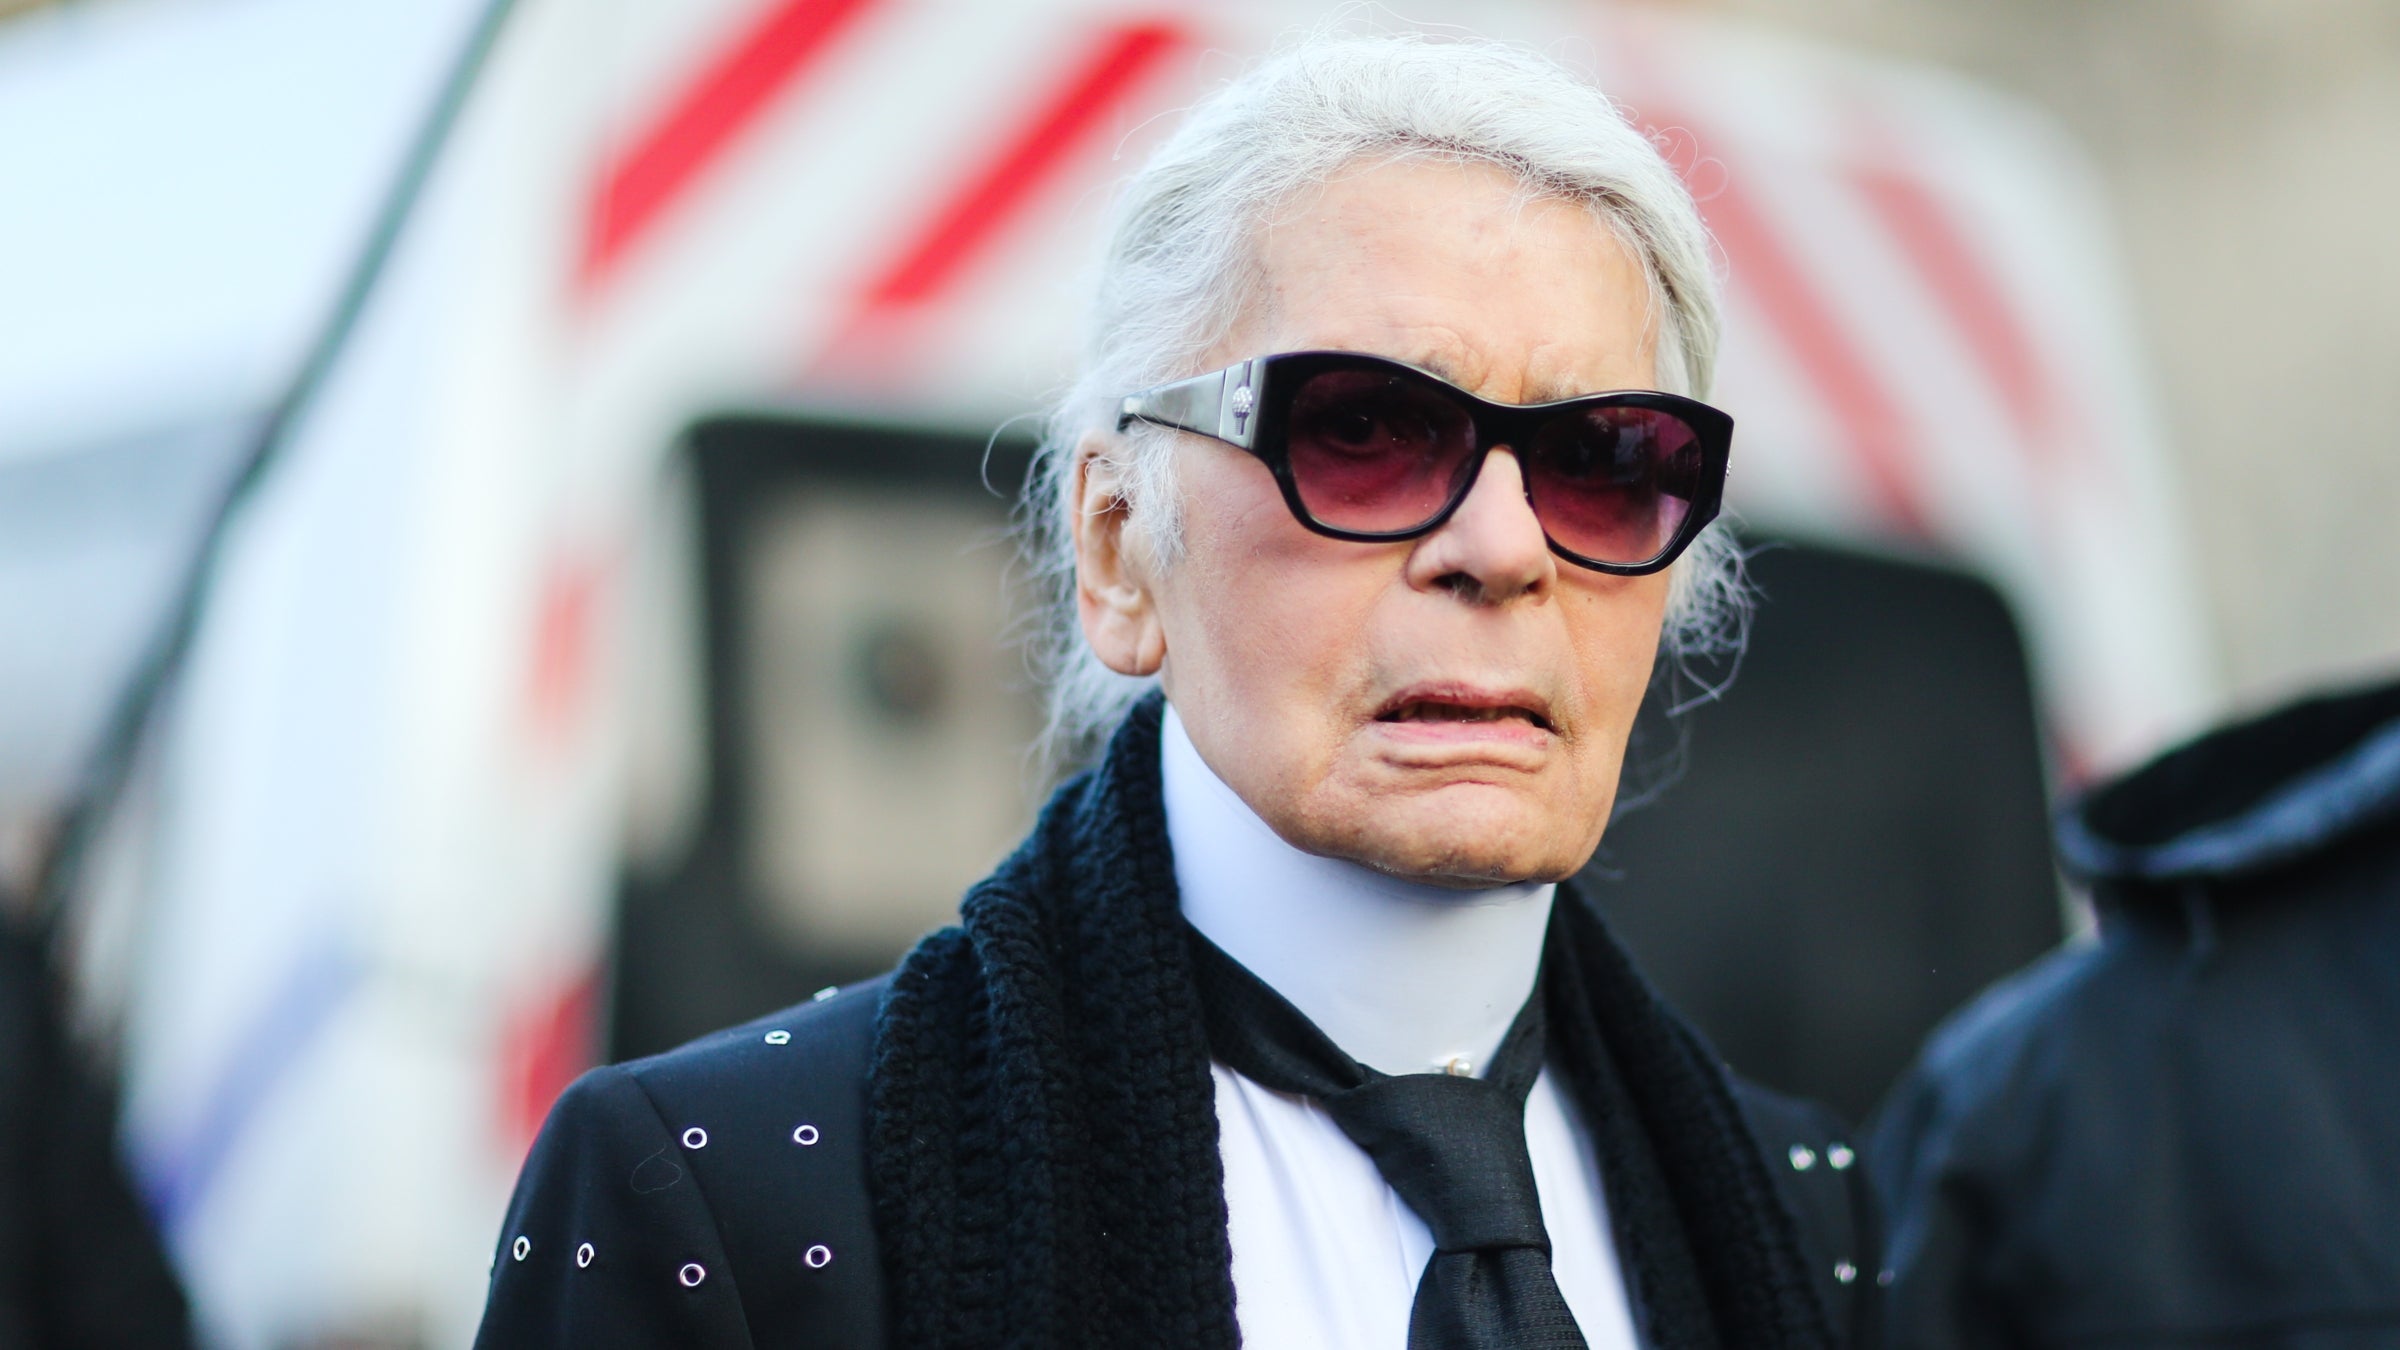 The Most Outrageous Outdoor Gear Designs of Karl Lagerfeld